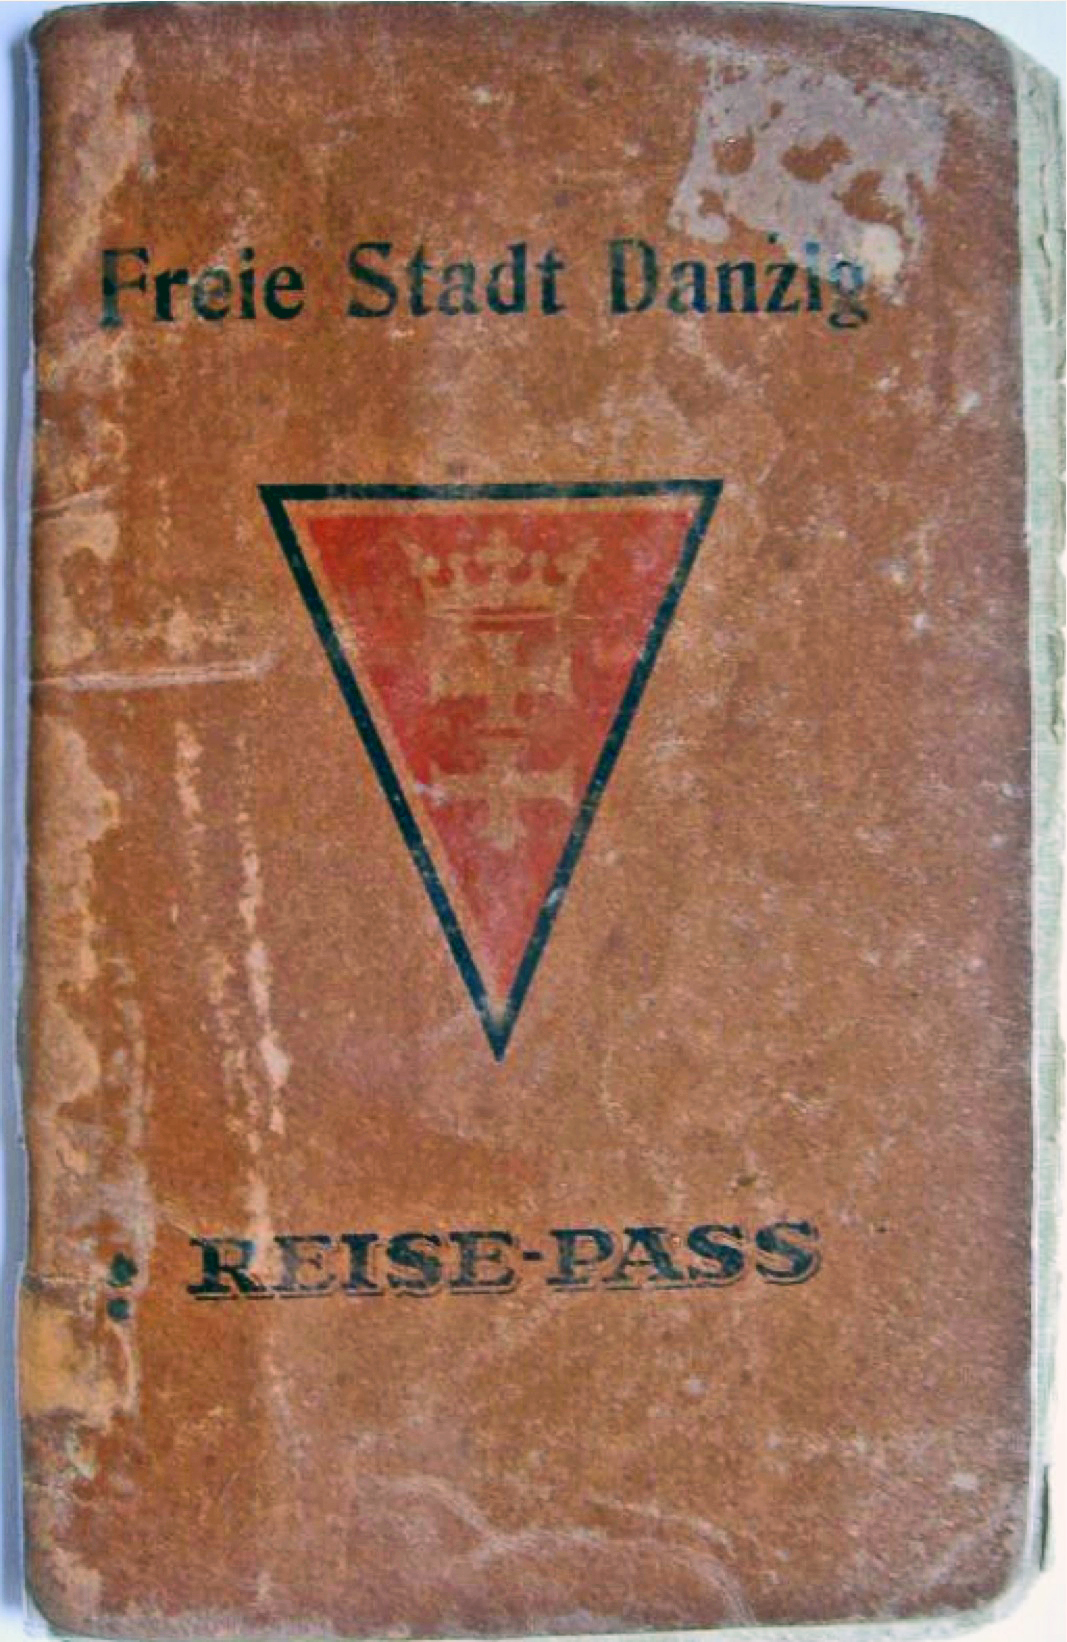 Passport issued by the Free City of Danzig